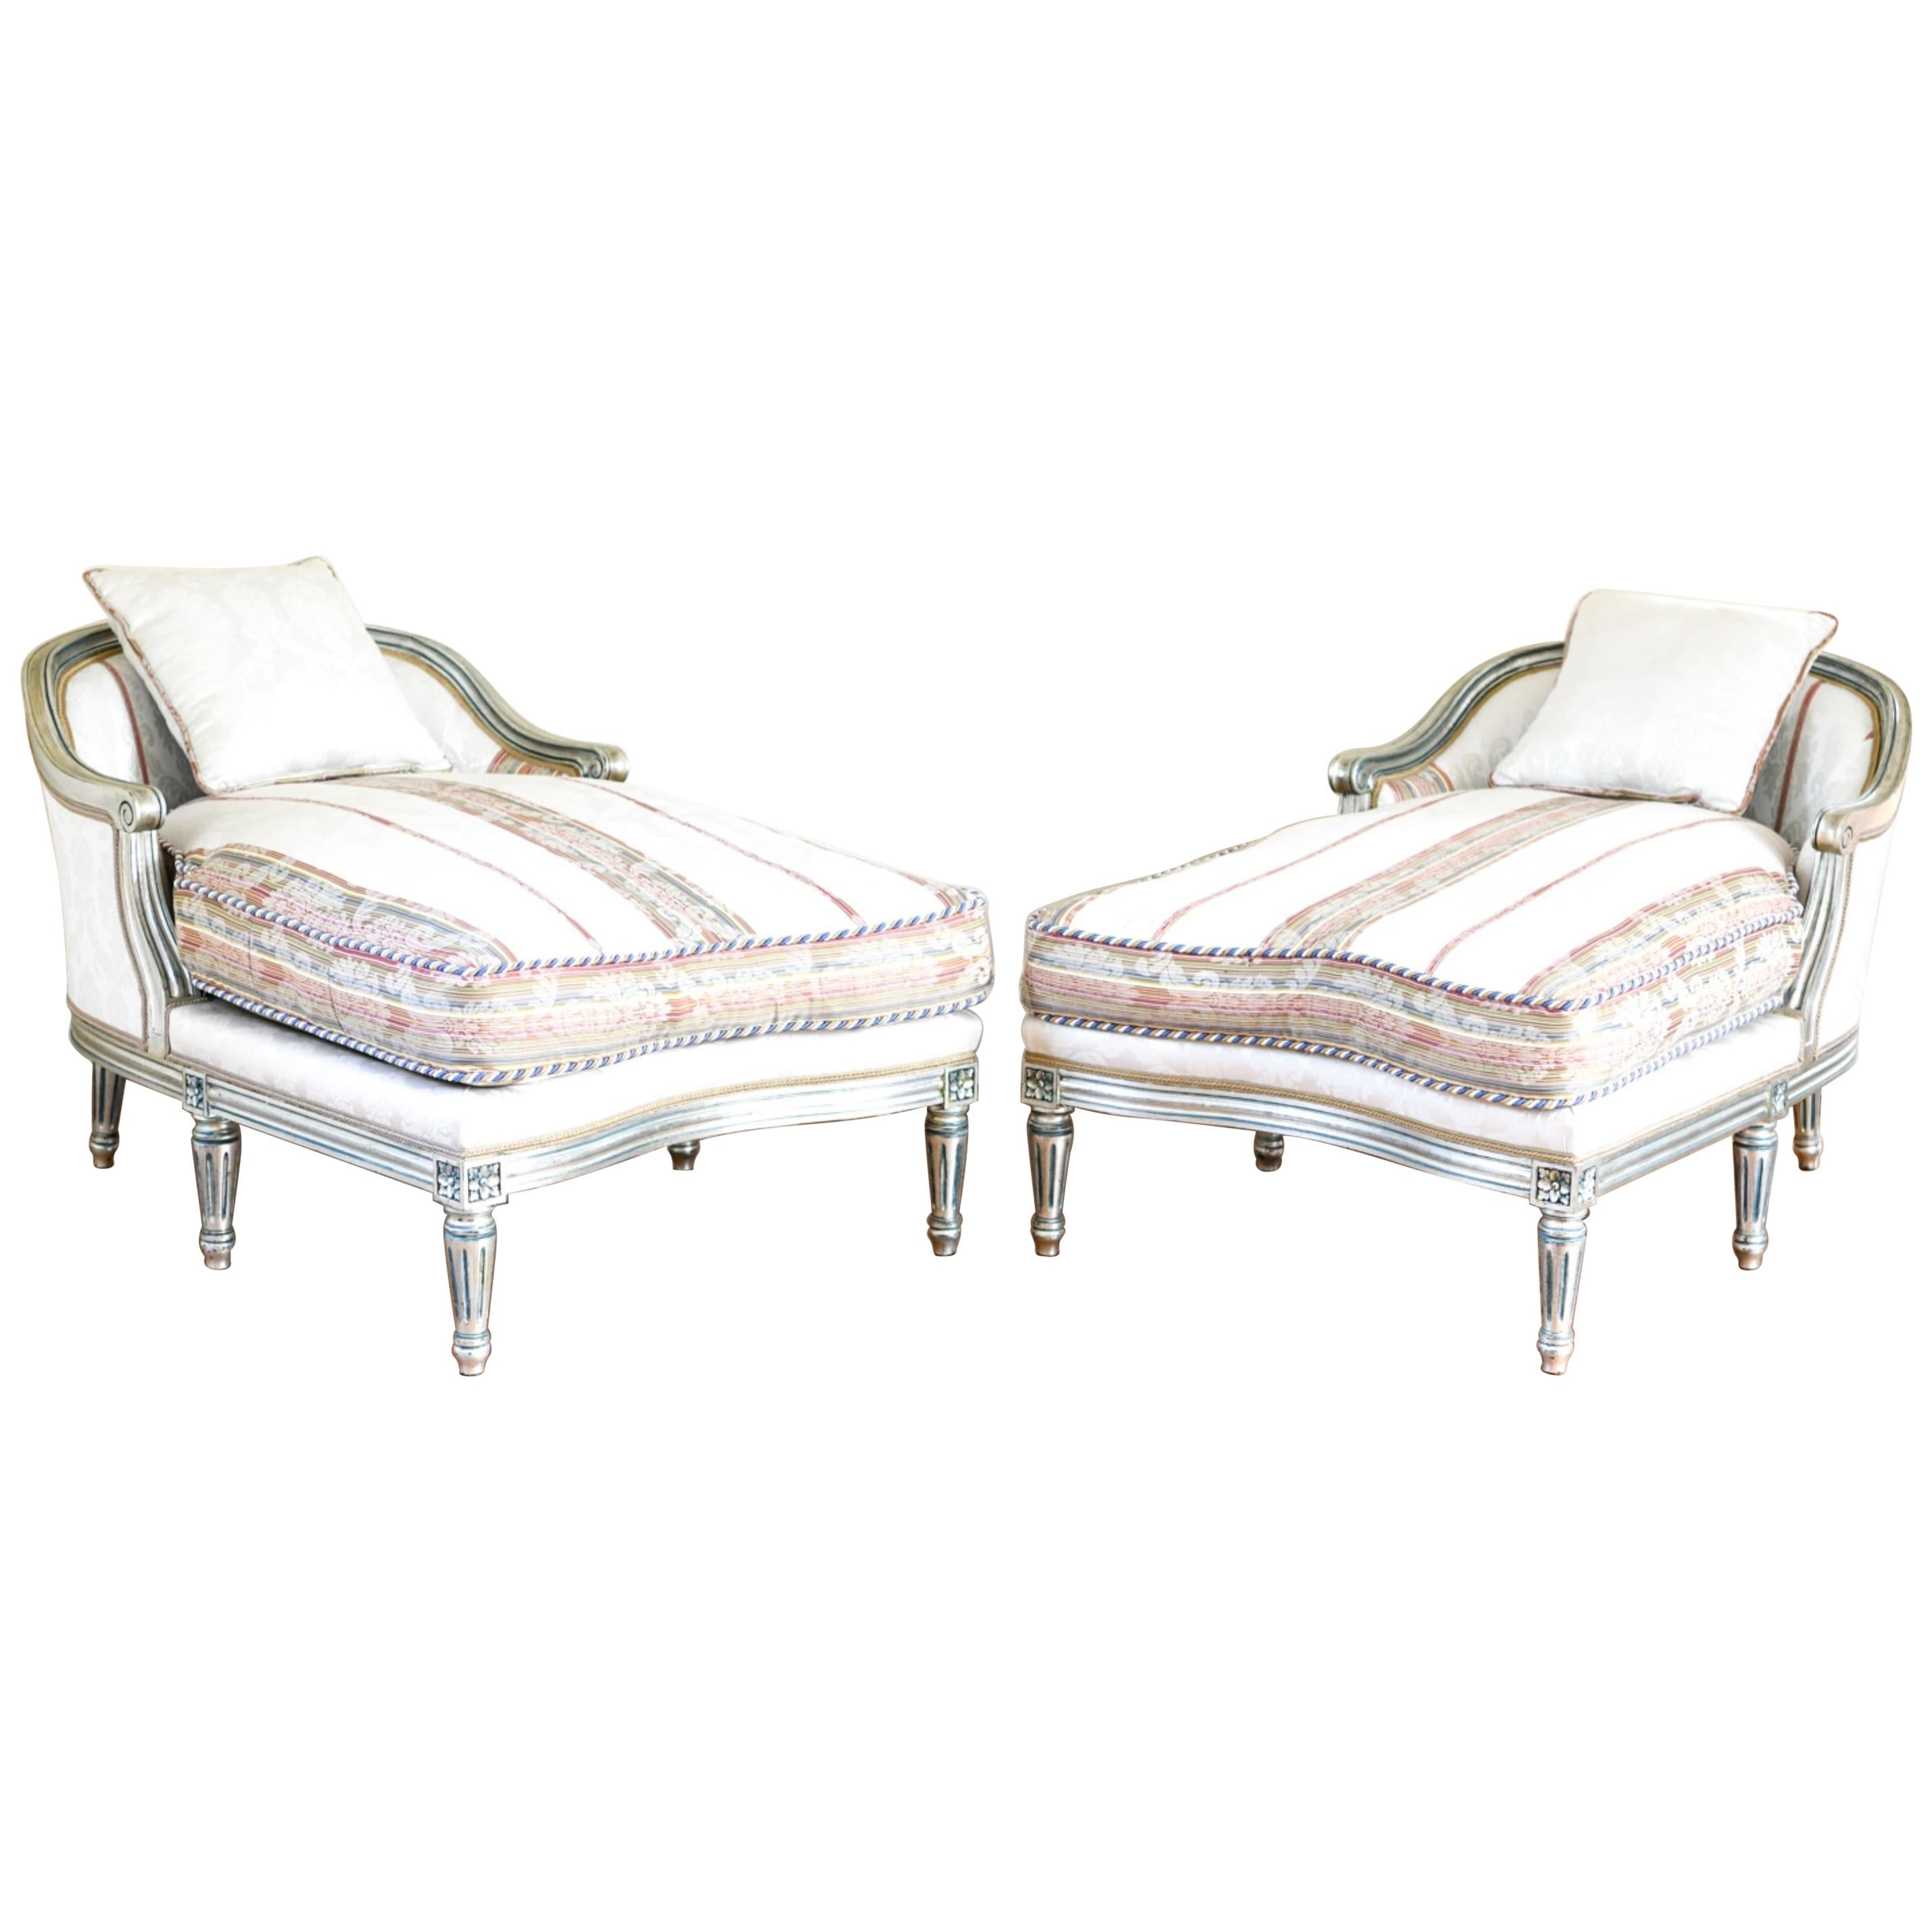 Hollywood Regency Louis XVI style chaise lounges or extended marquees. The pair in a fine French painted and parcel gilt silver decorated frame with an exquisite matching fabric. Having hand silver leaf carved and silver gilt frames these stunning